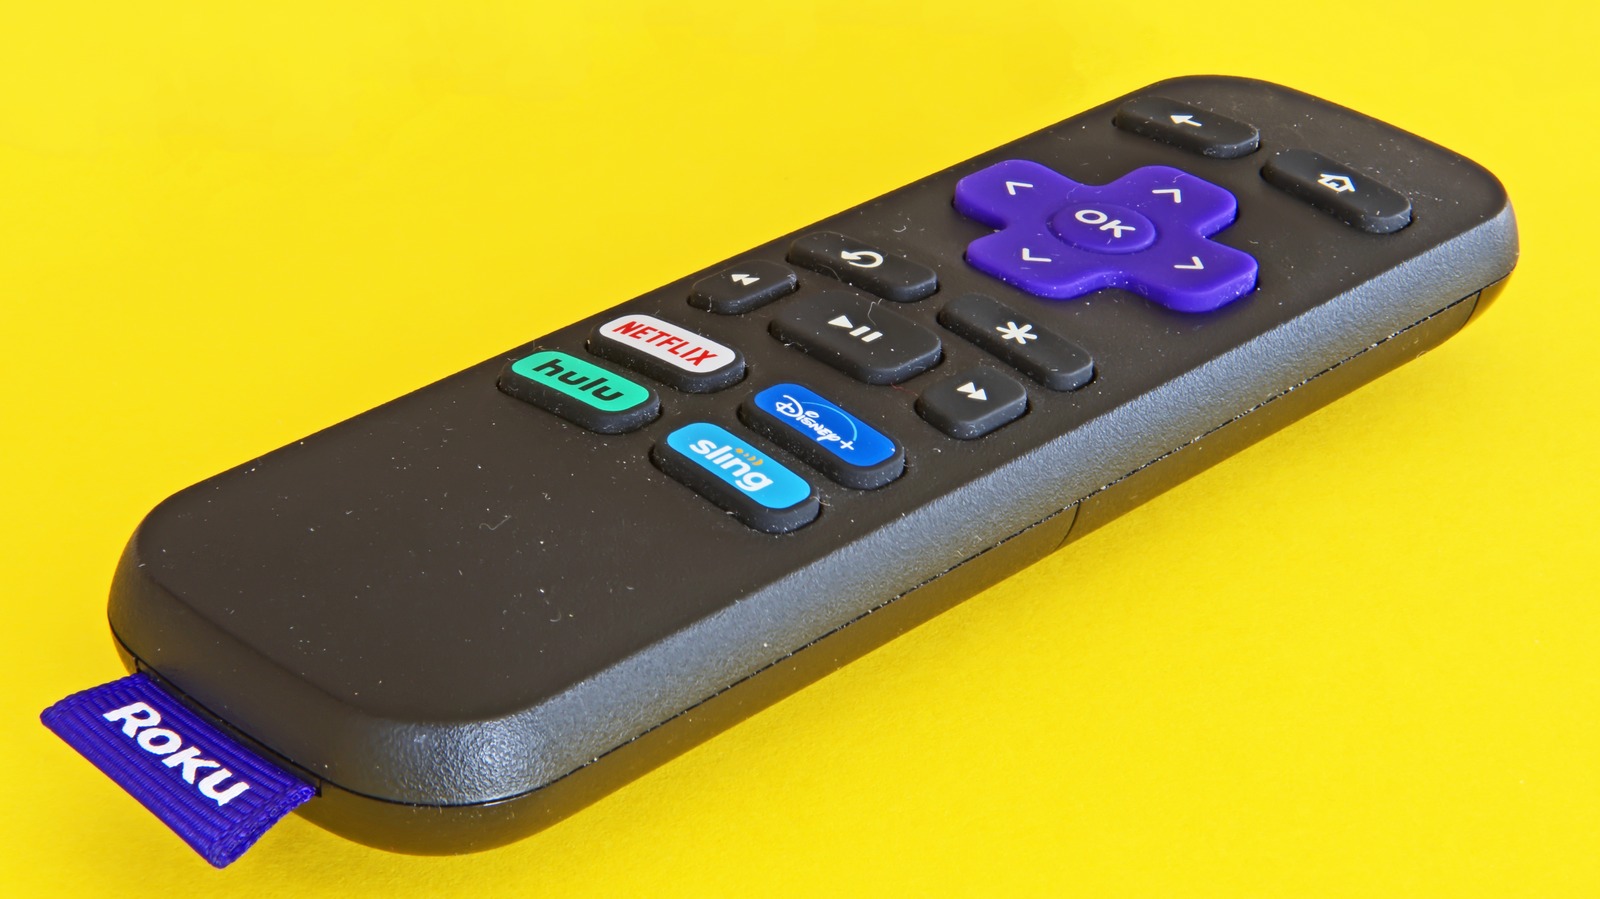 How To Find And Watch Twitch On A Roku Device